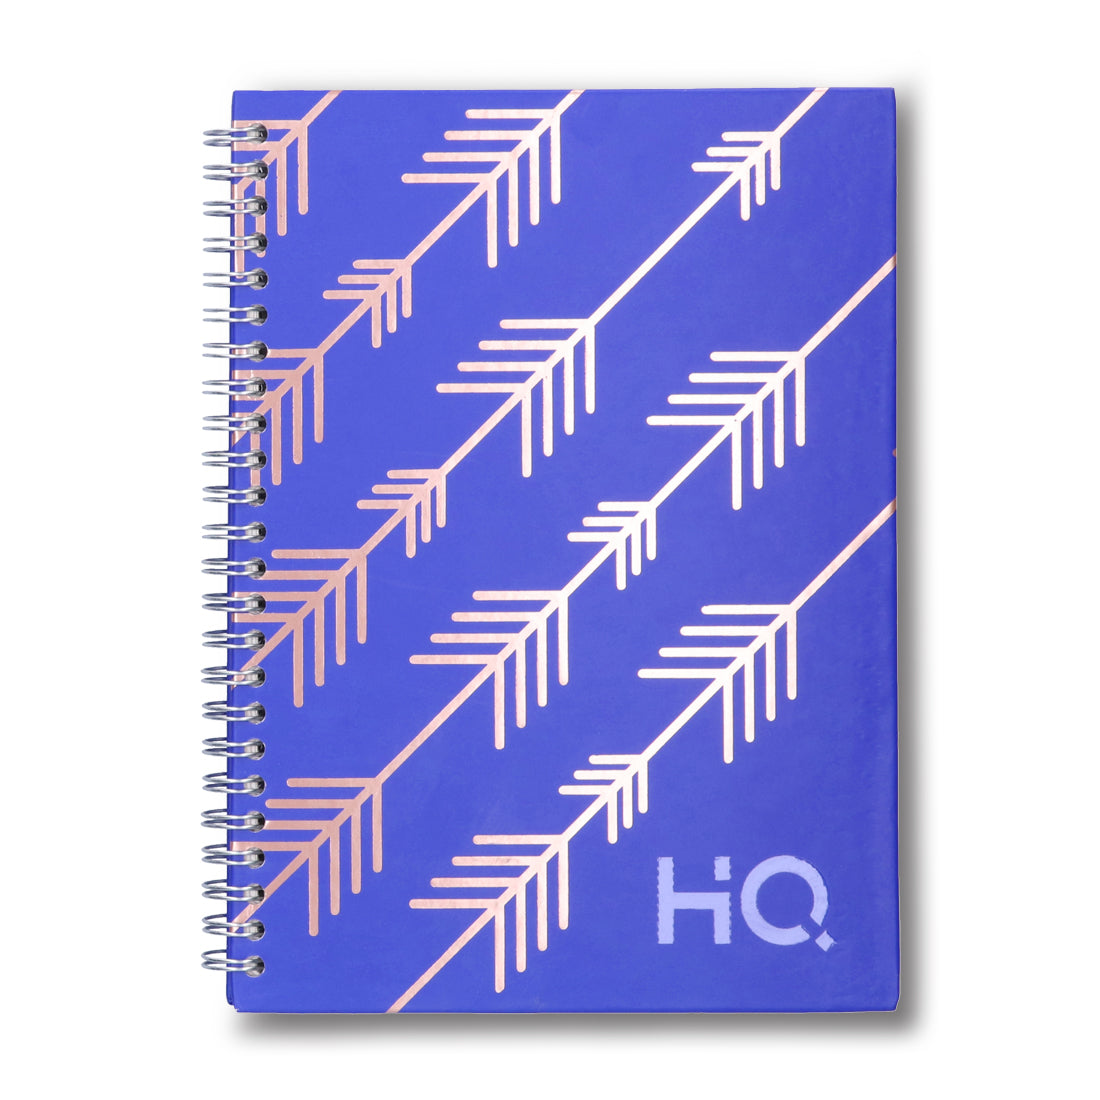 Navneet HQ | Hard Cover Notebook - Corporate Edge (Blue) for Office and Professional Use | Wiro Bound and Foil Stamping | Single Line | A5 Size - 21 cm x 14.8 cm | 192 Pages